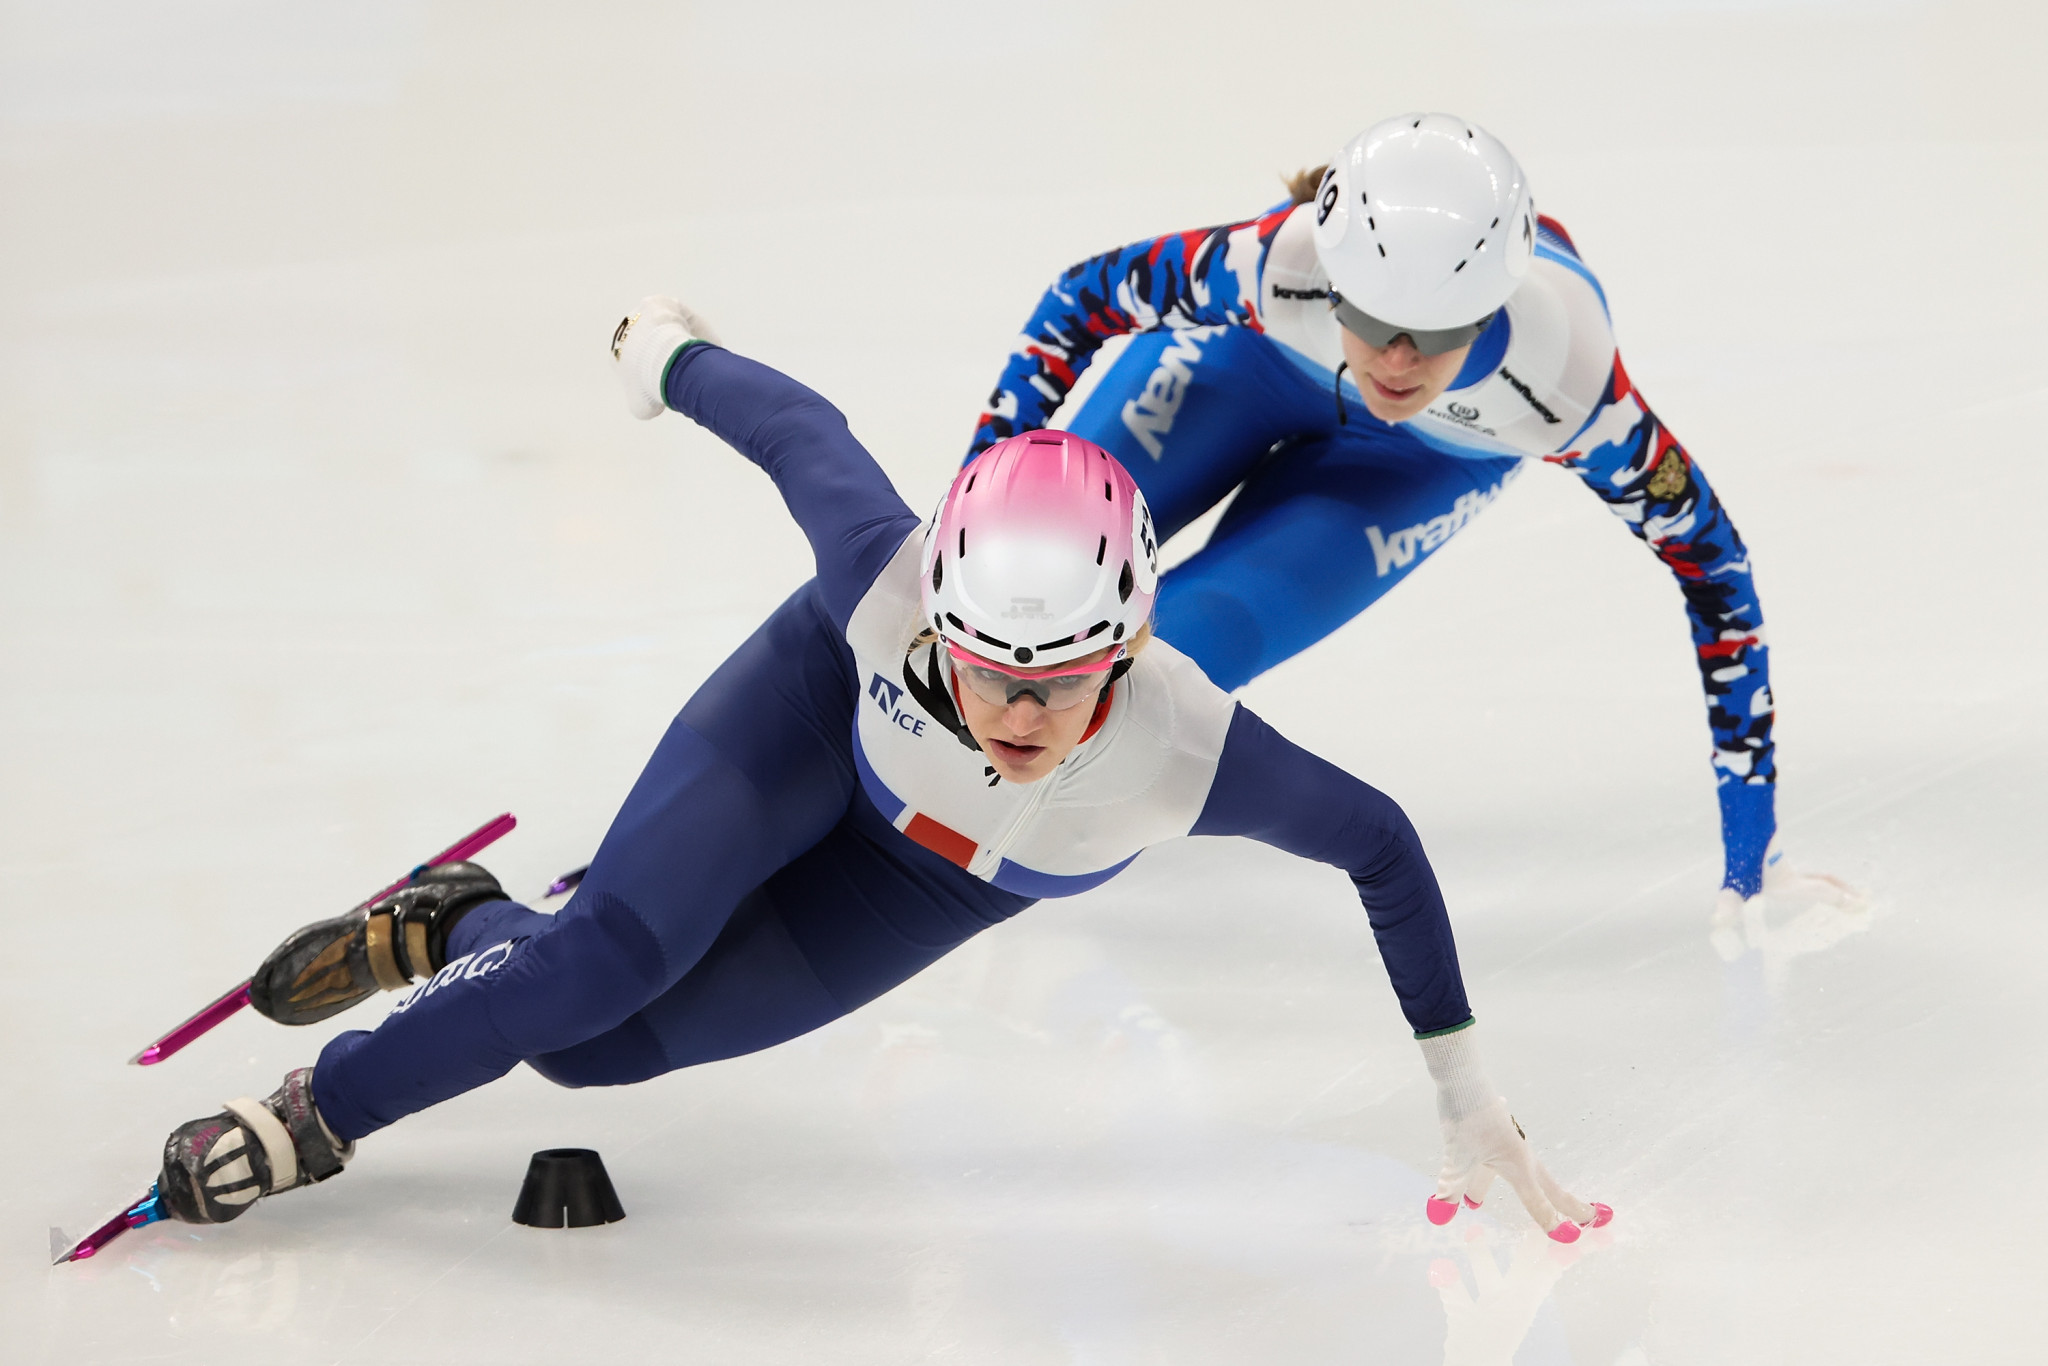 Britain's short track speed skater Elise Christie is expected to miss Beijing 2022 because of injury ©Getty Images